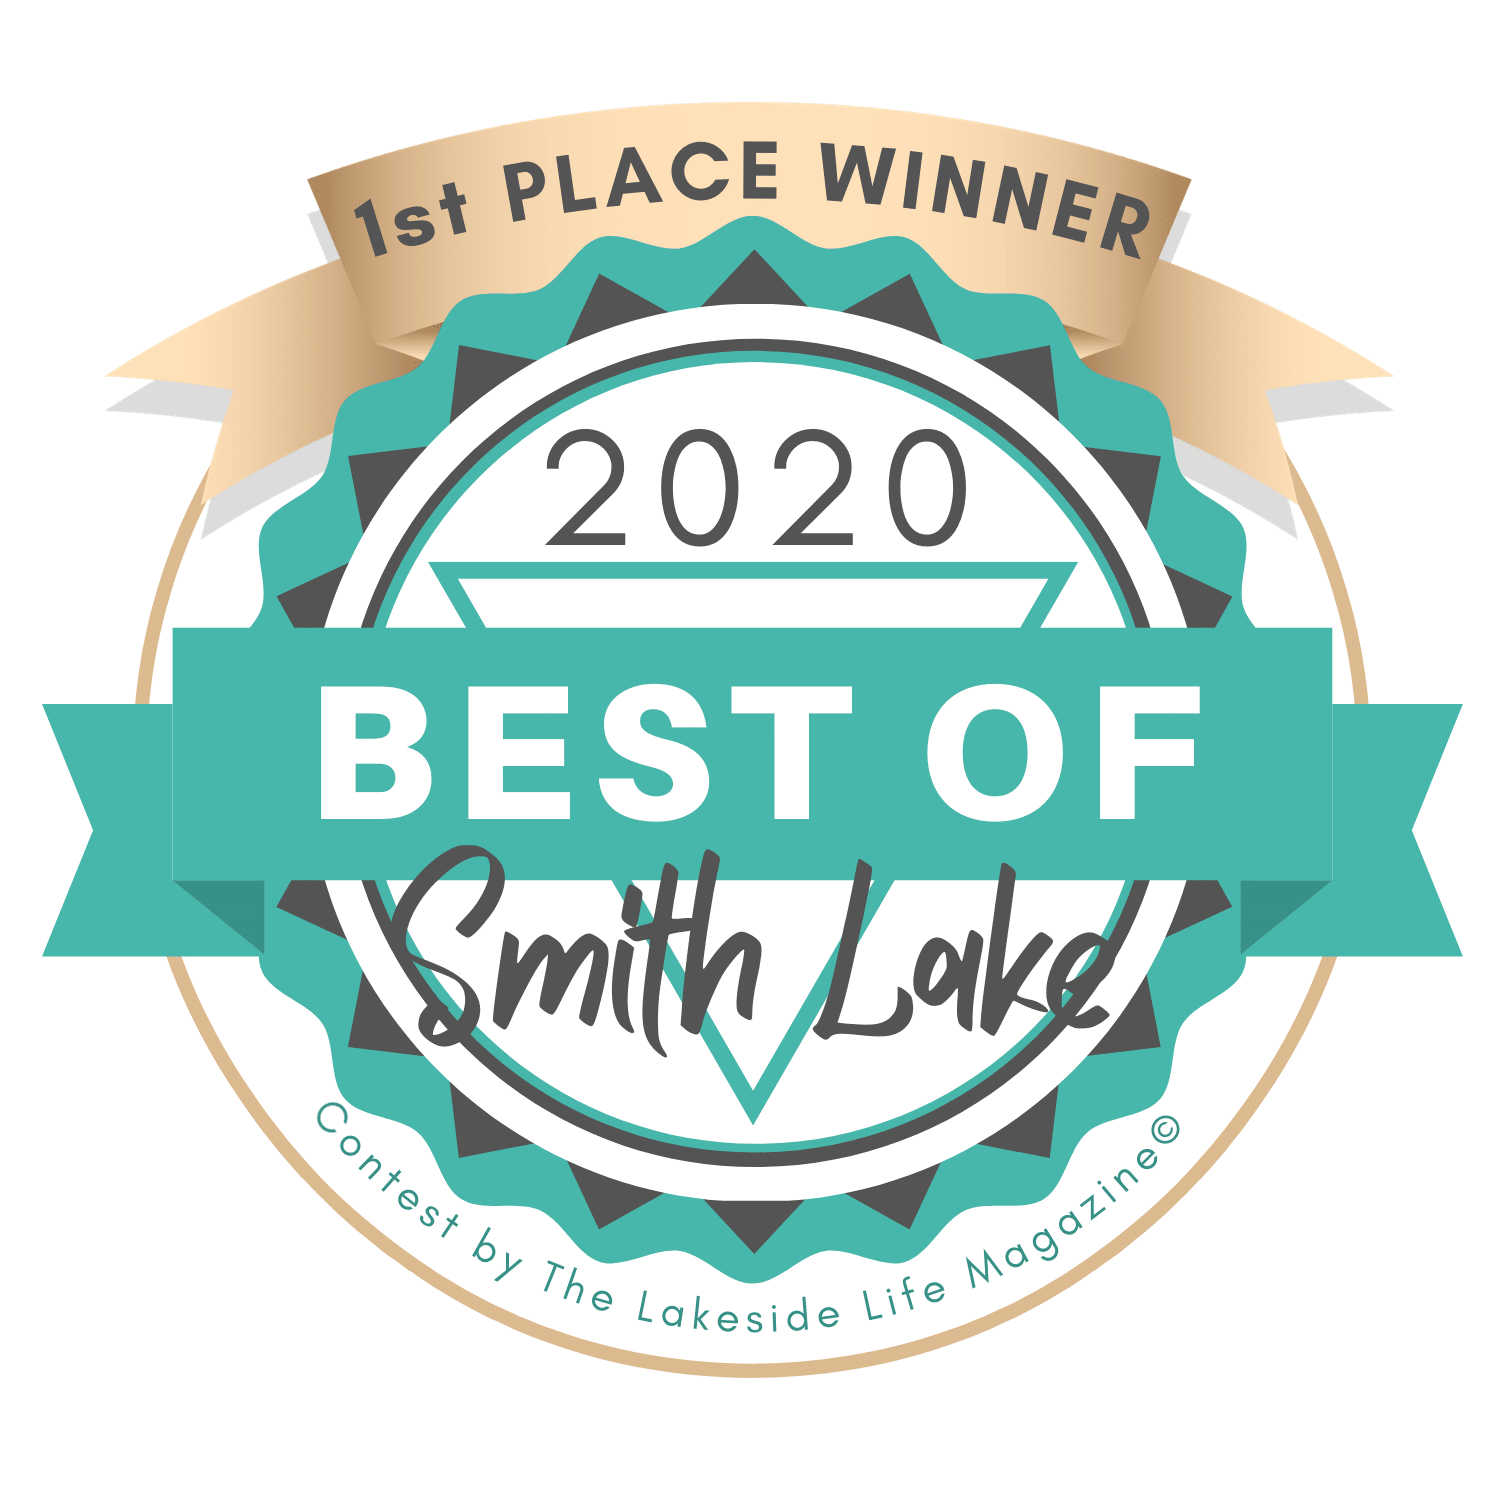 Smith Lake 1st Place - Best of Smith Lake